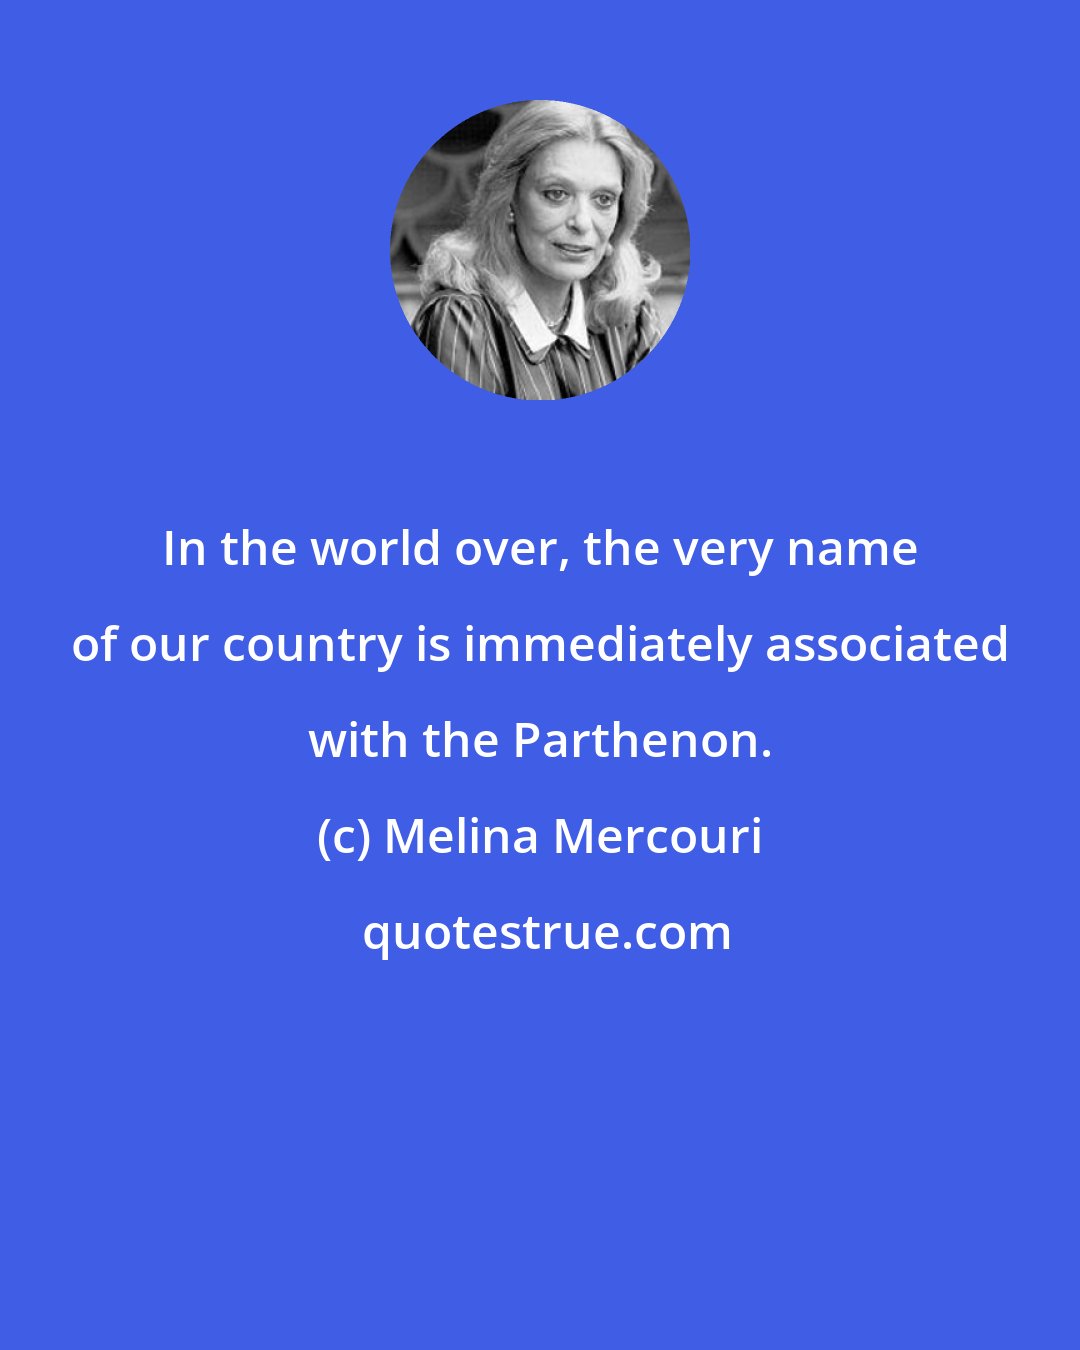 Melina Mercouri: In the world over, the very name of our country is immediately associated with the Parthenon.